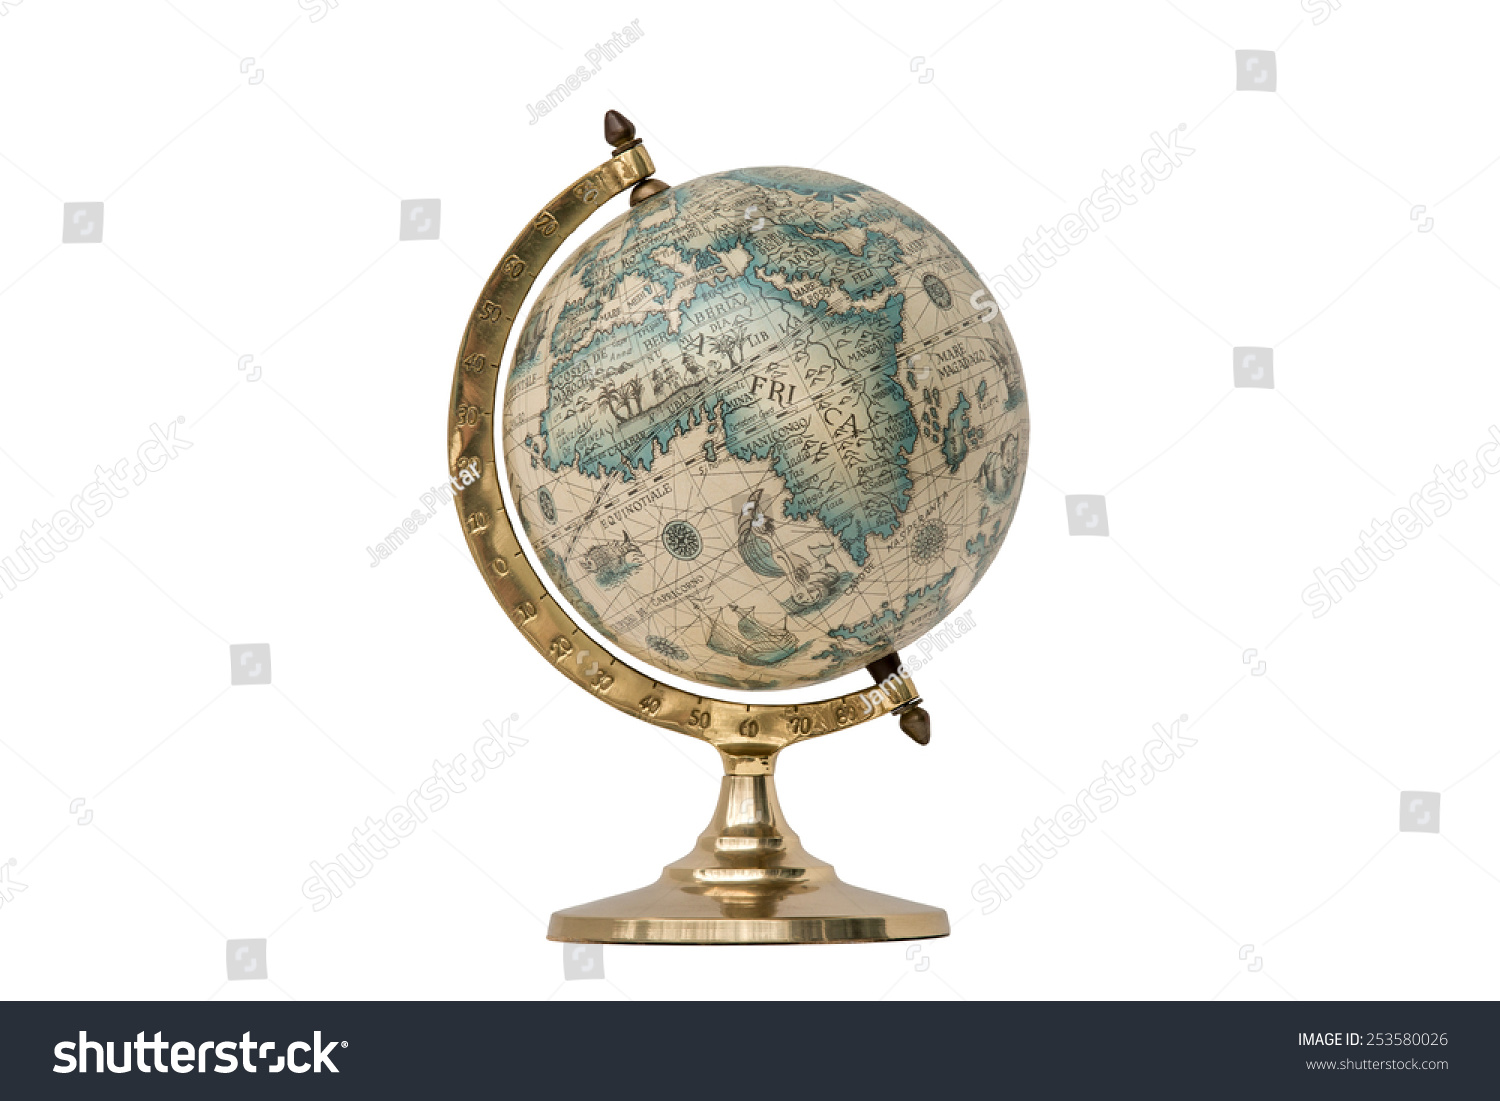 Old Style World Globe - Antique world globe isolated on white background.  Studio close up.  Showing Africa and some of Middle East. #253580026